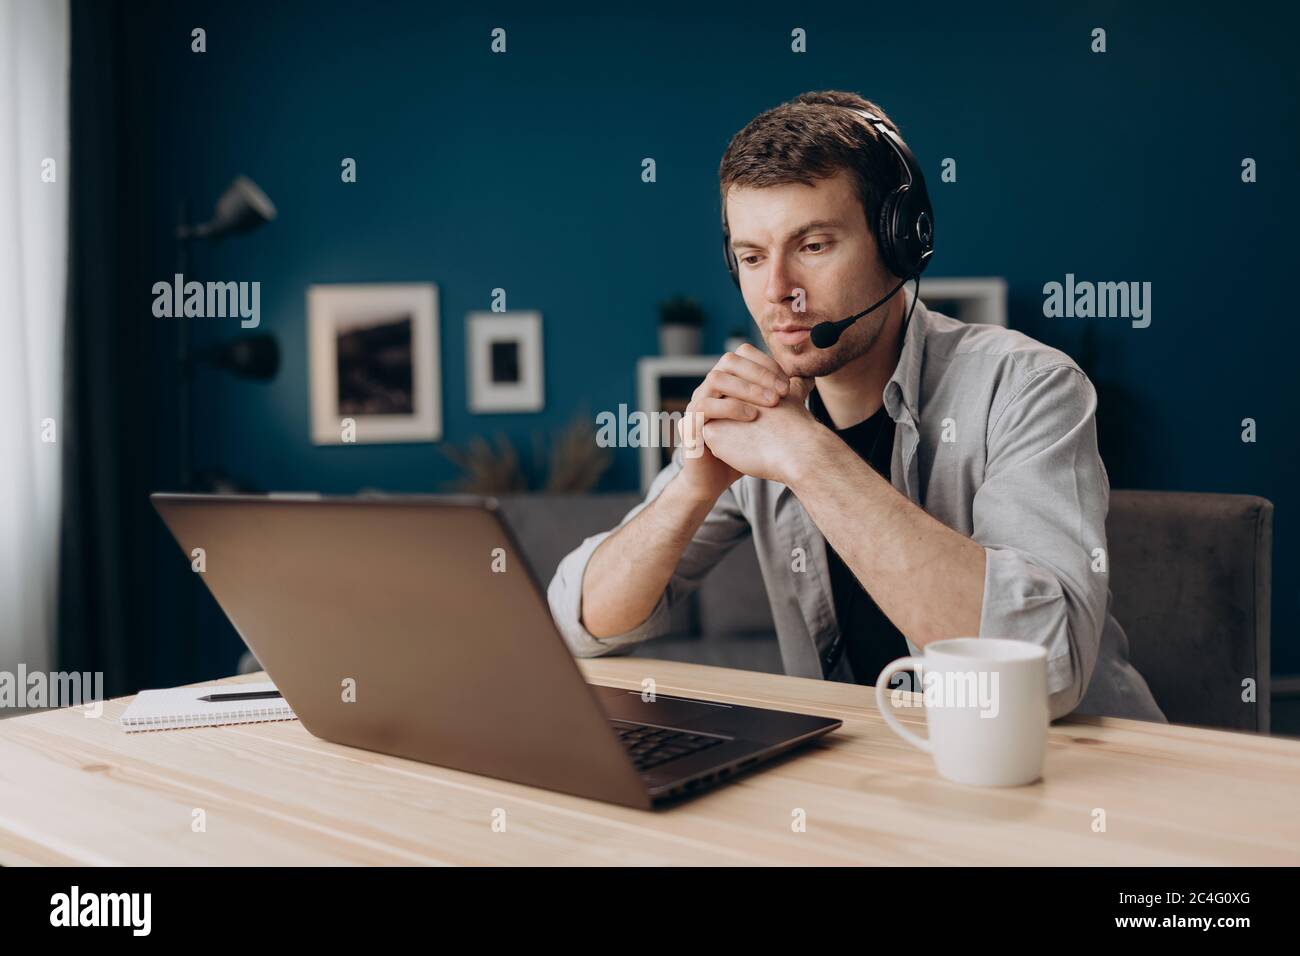 Confident man wearing headset during video chat on laptop Stock Photo